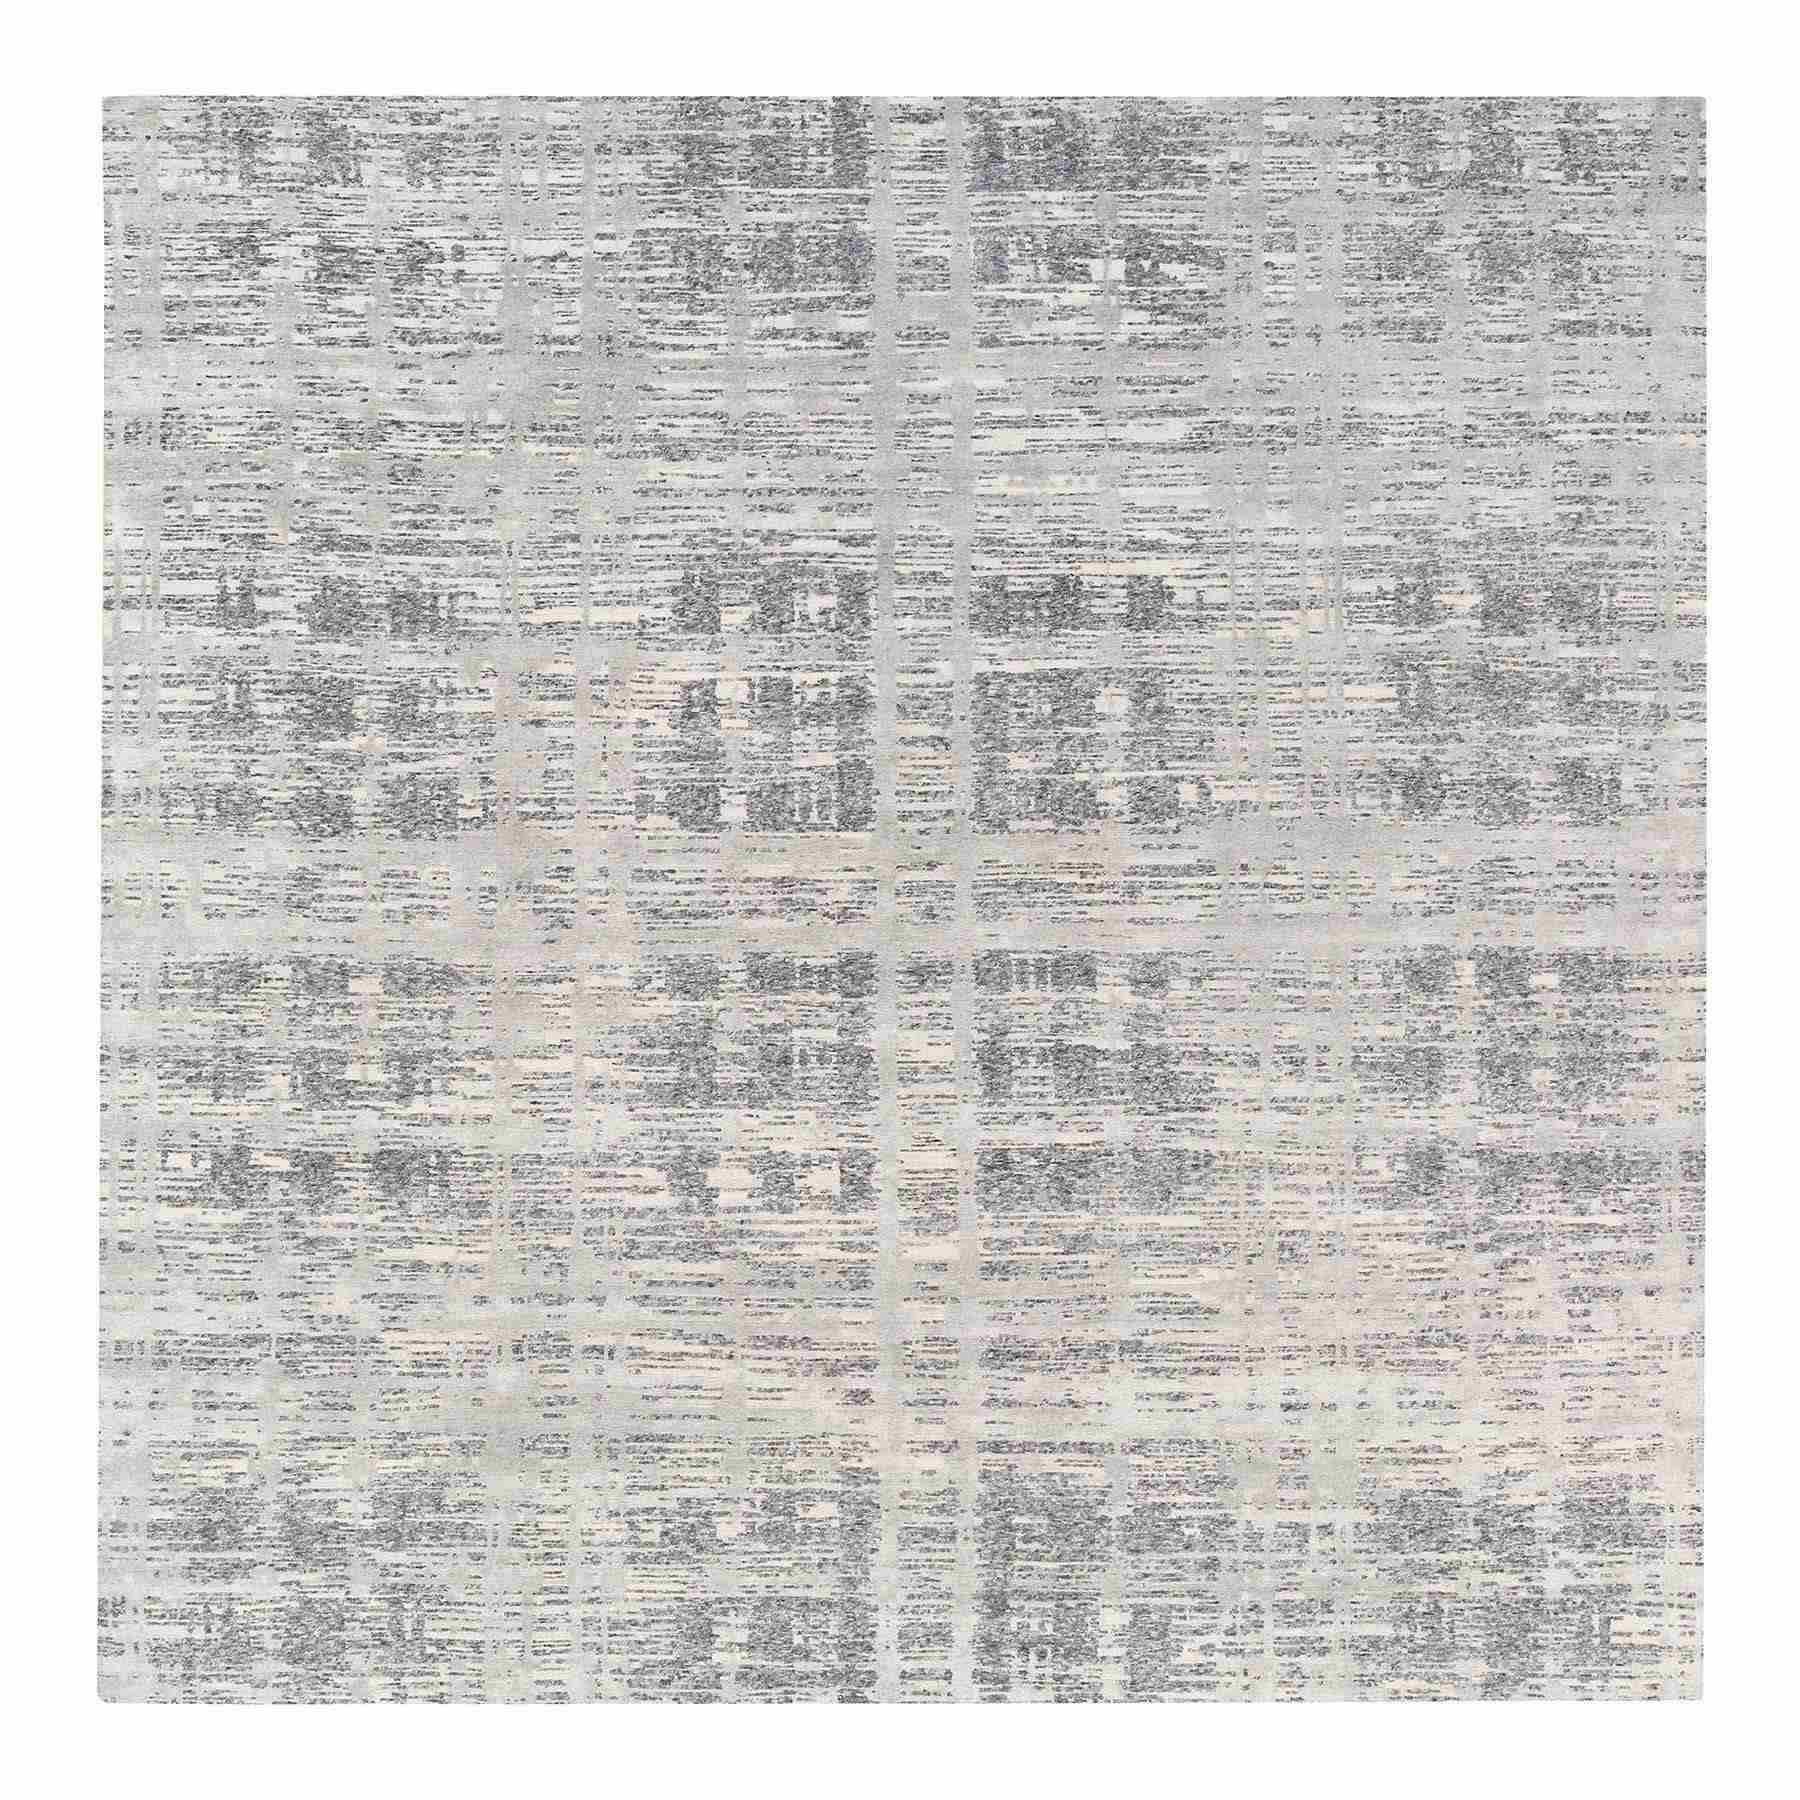 Modern-and-Contemporary-Hand-Knotted-Rug-314645